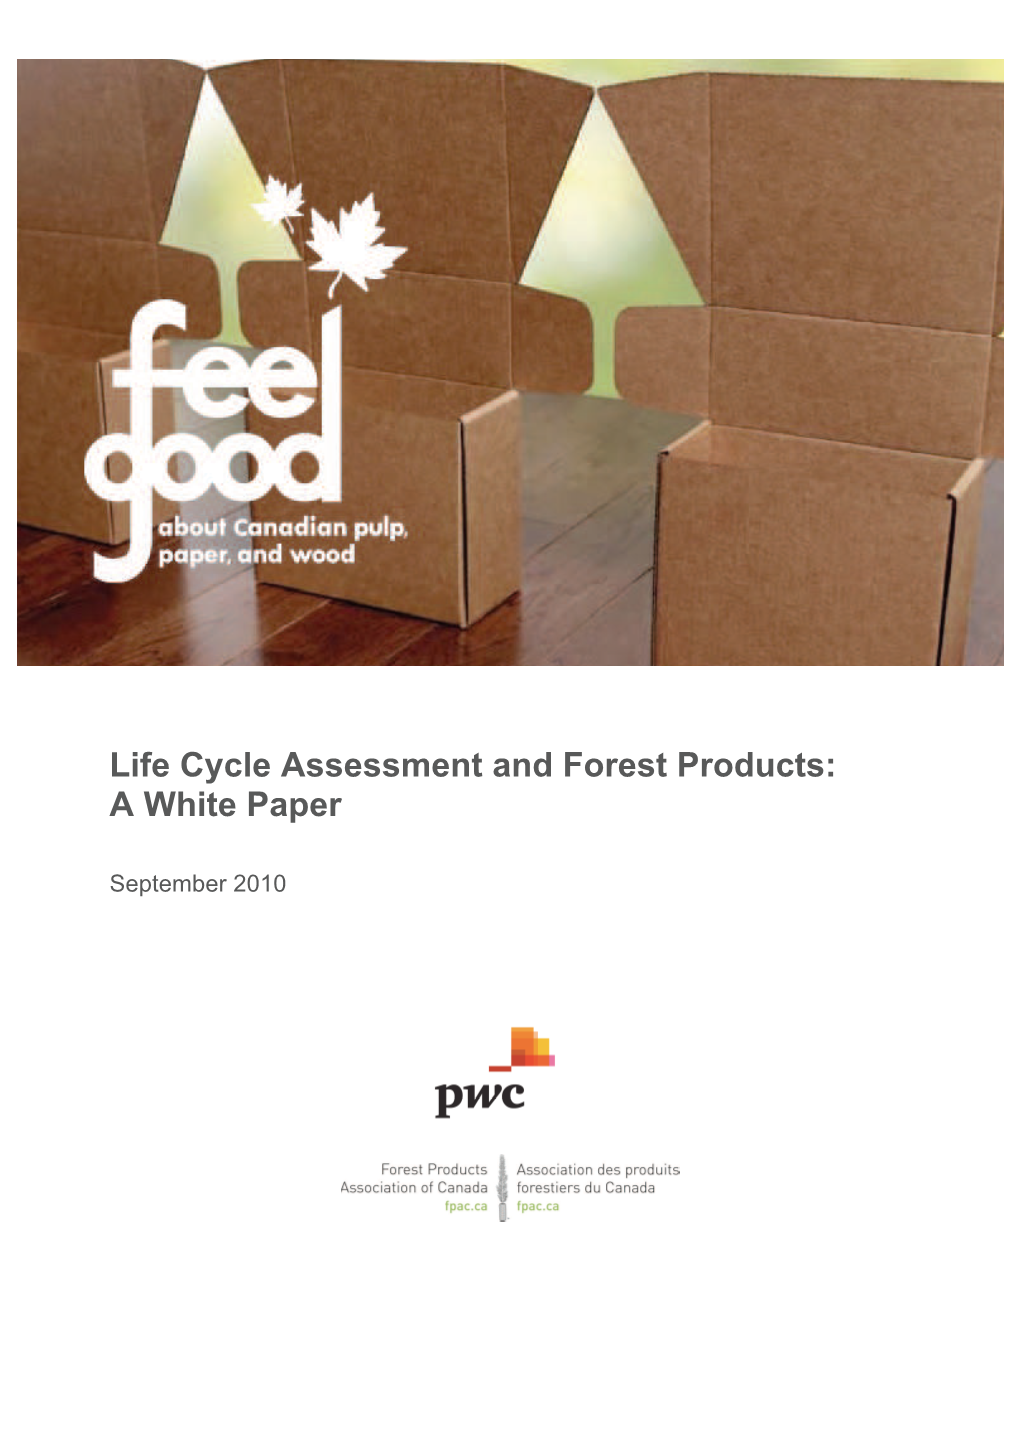 Life Cycle Assessment and Forest Products: a White Paper